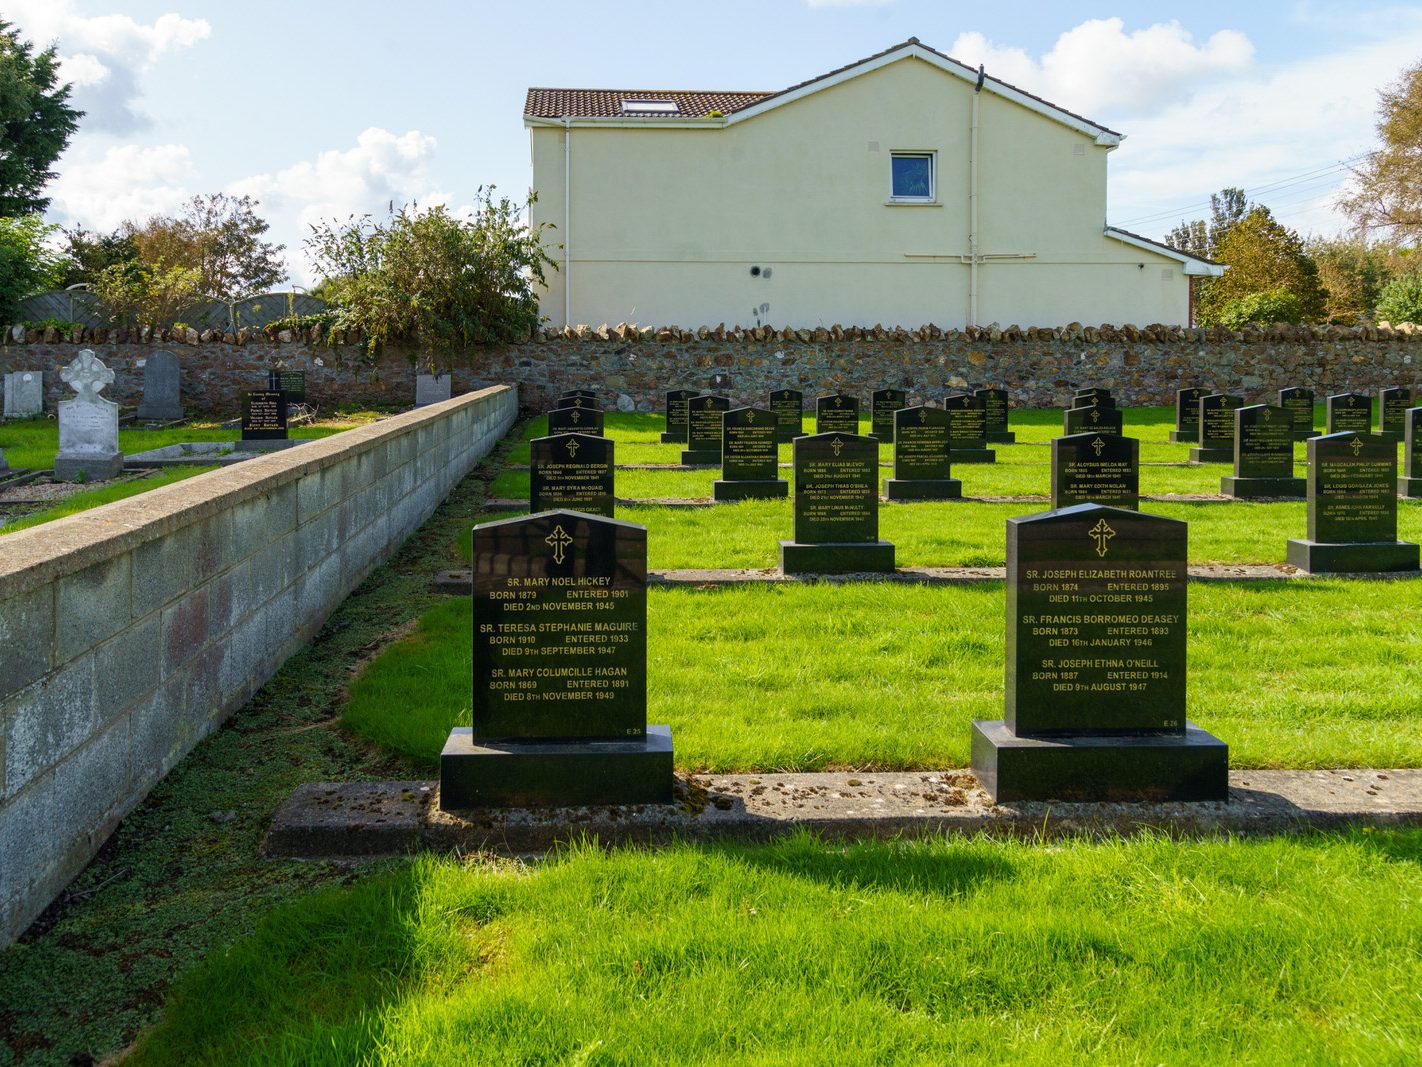 TODAY I MANAGED TO VISIT KILBARRACK CEMETERY [AFTER A NUMBER OF FAILED ATTEMPTS OVER A PERIOD OF TEN YEARS] 040